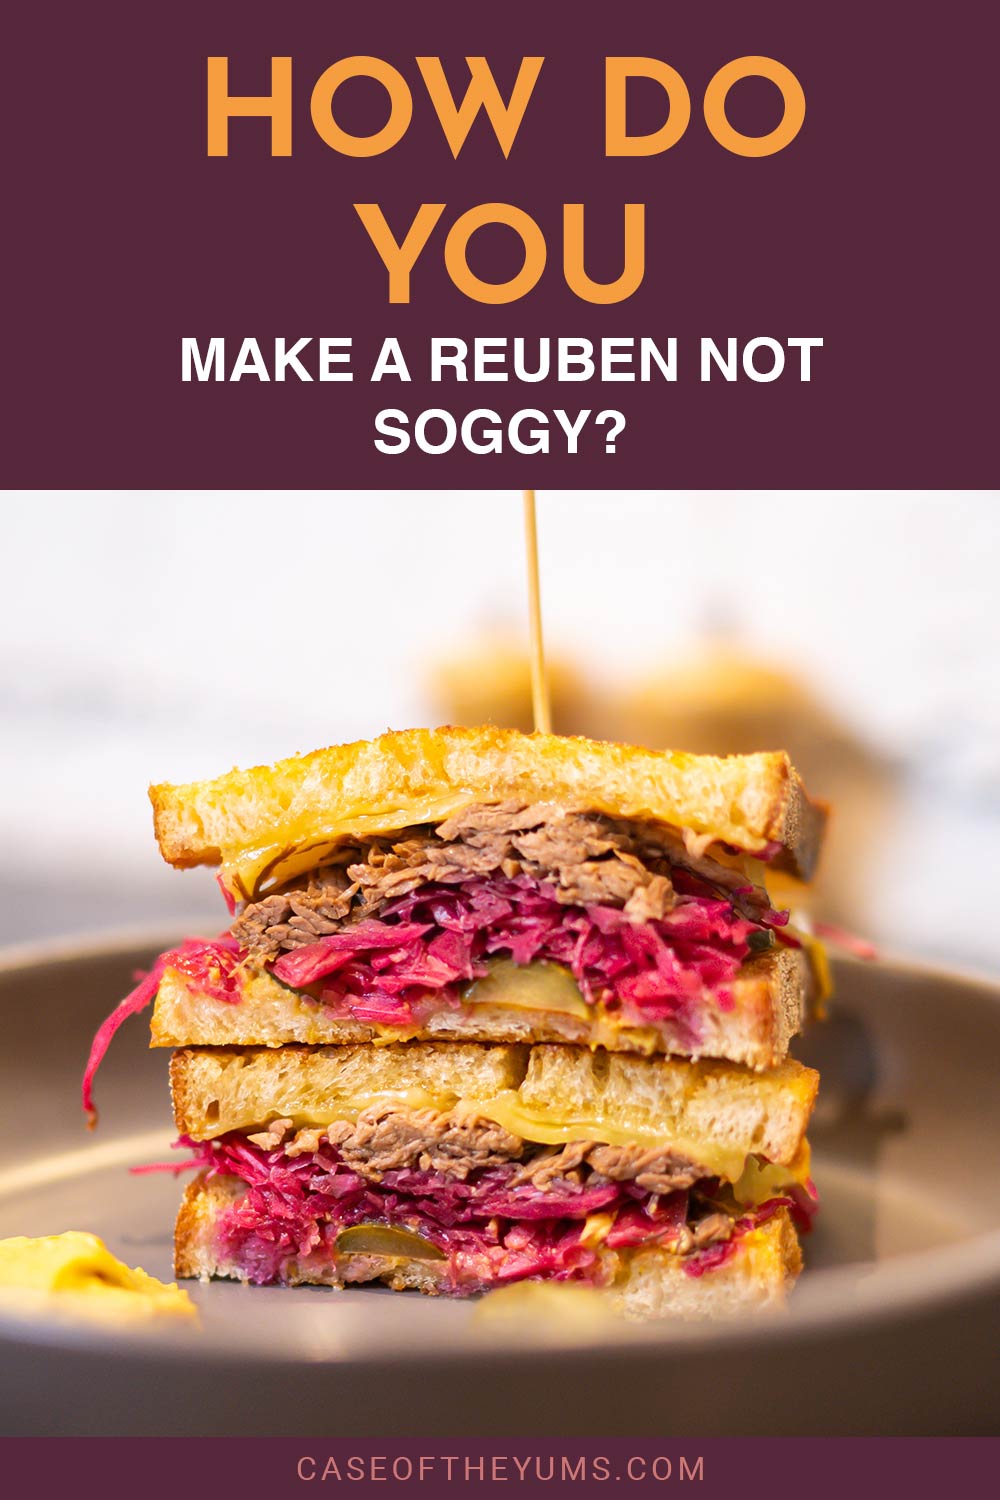 Ruben sandwitch served on a plate - How do you make a Reuben not soggy?